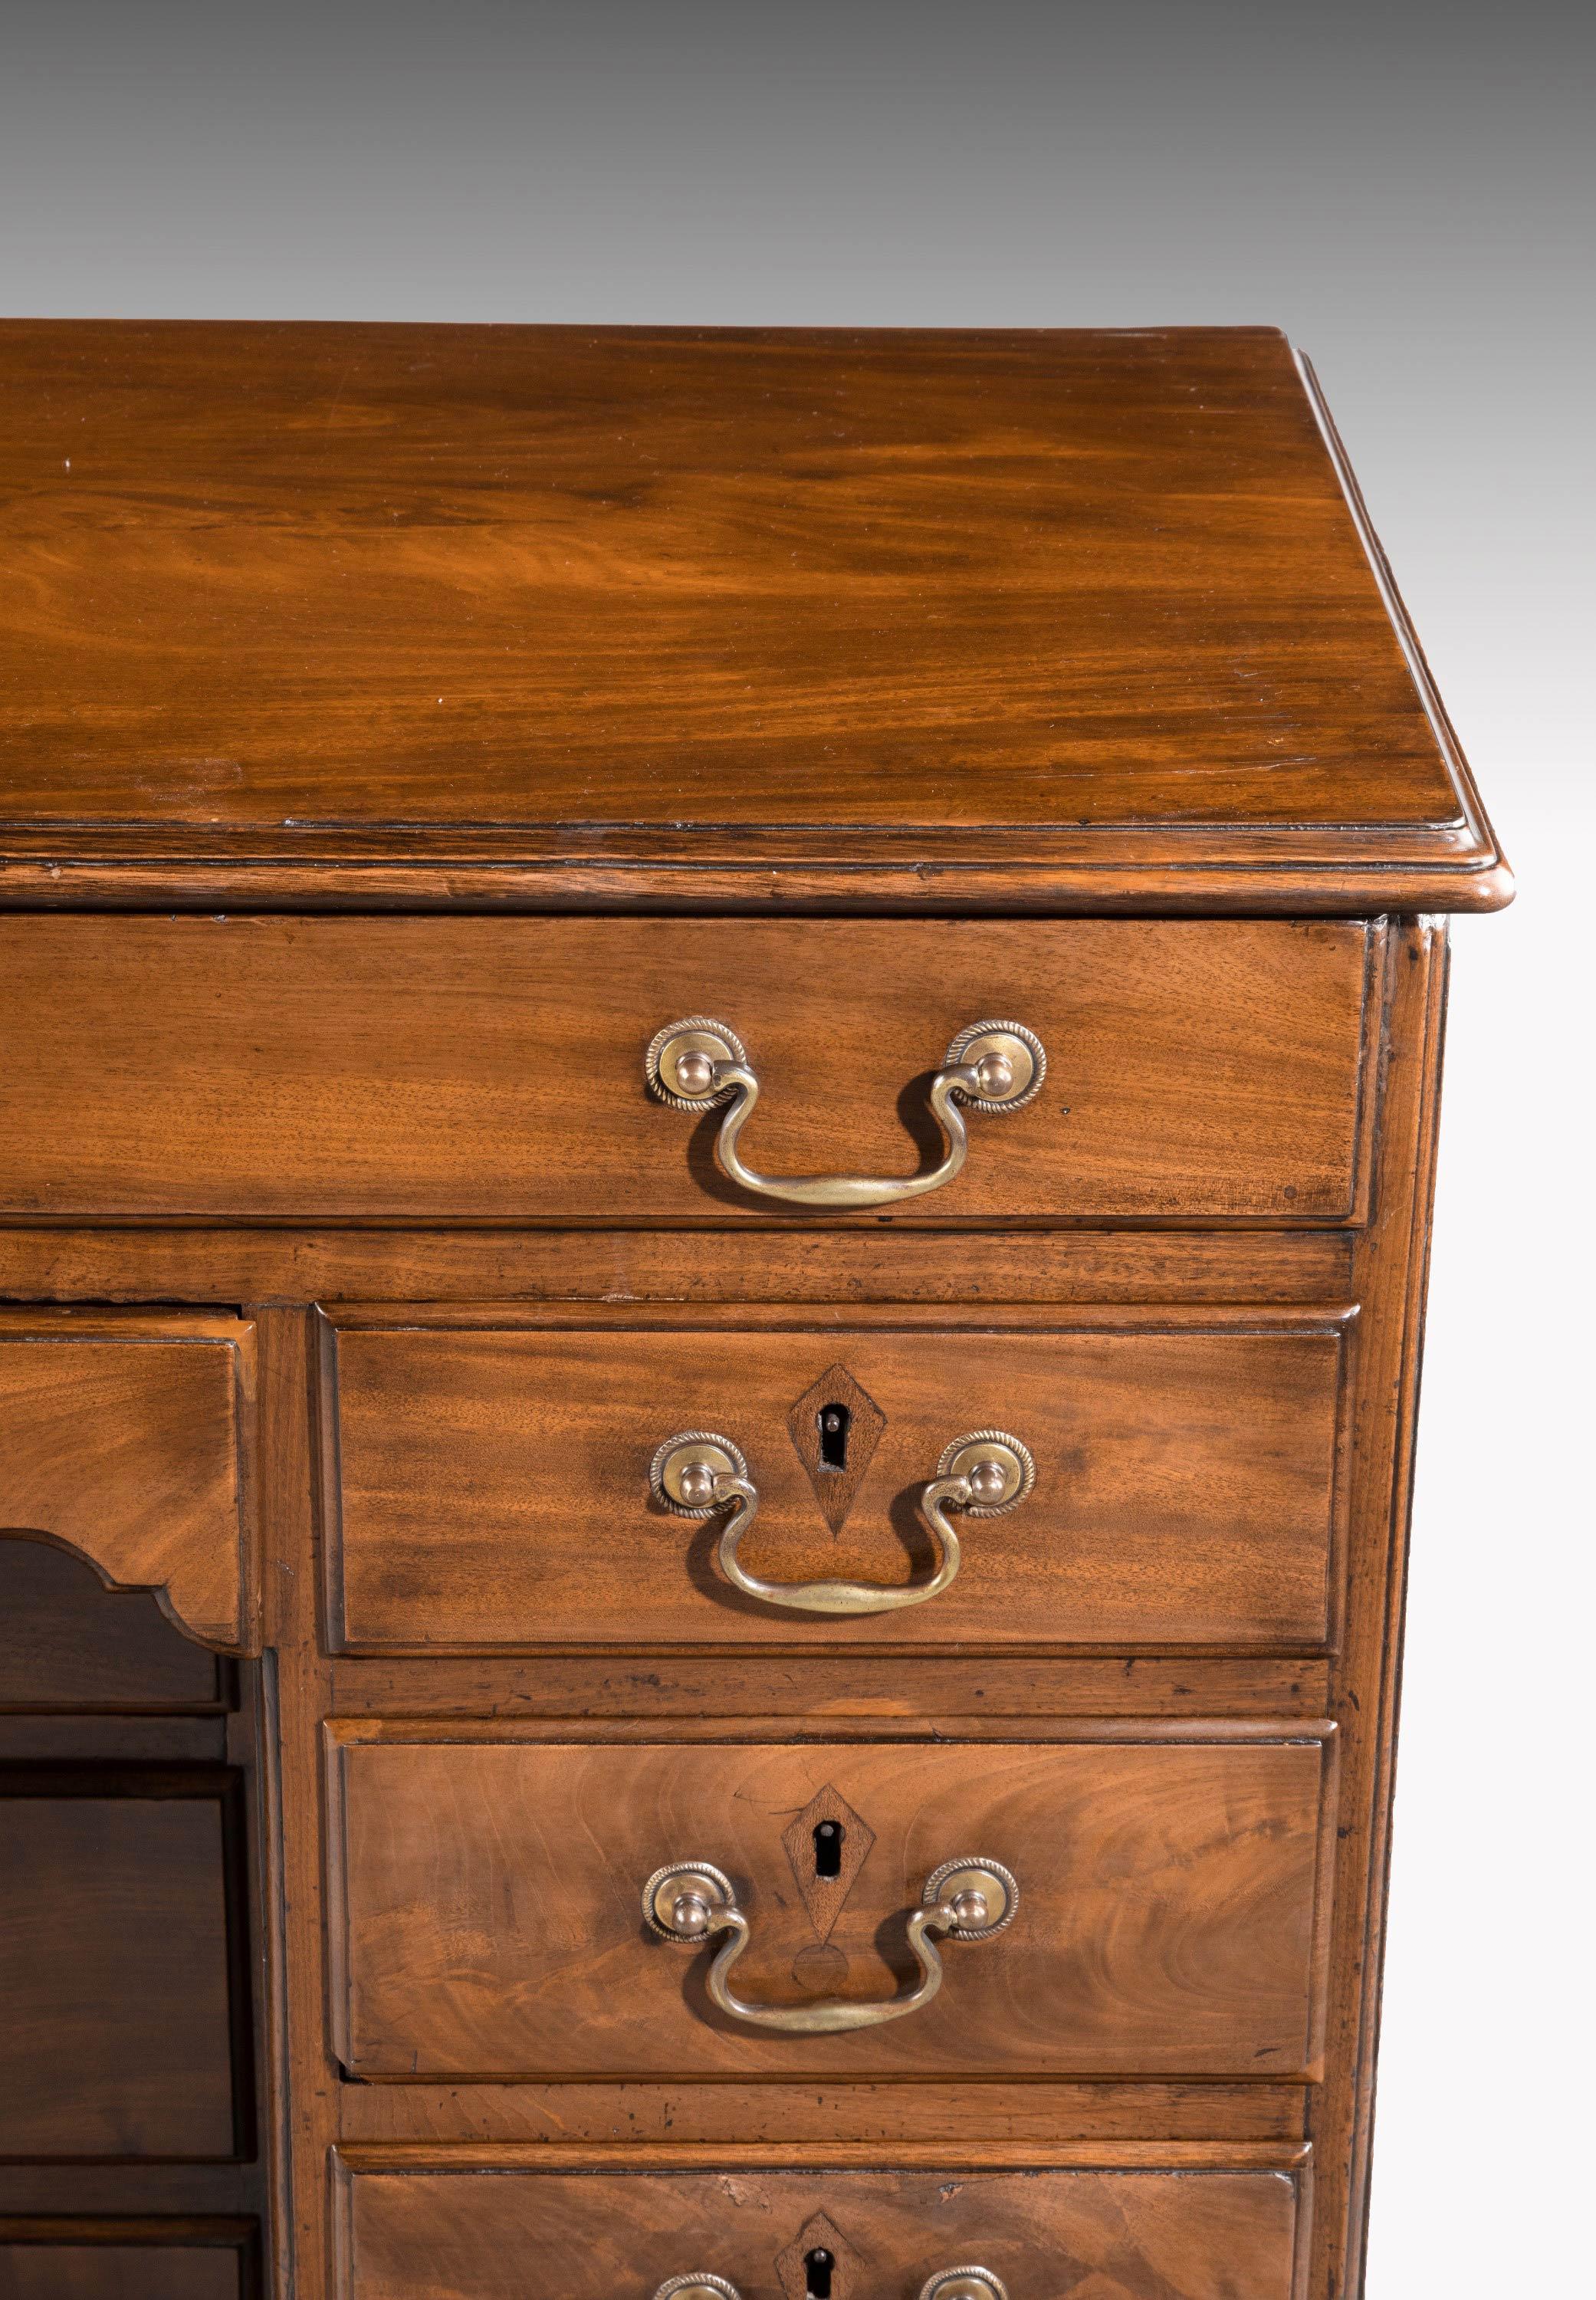 18th Century Chippendale Period Kneehole Desk or Dressing Table